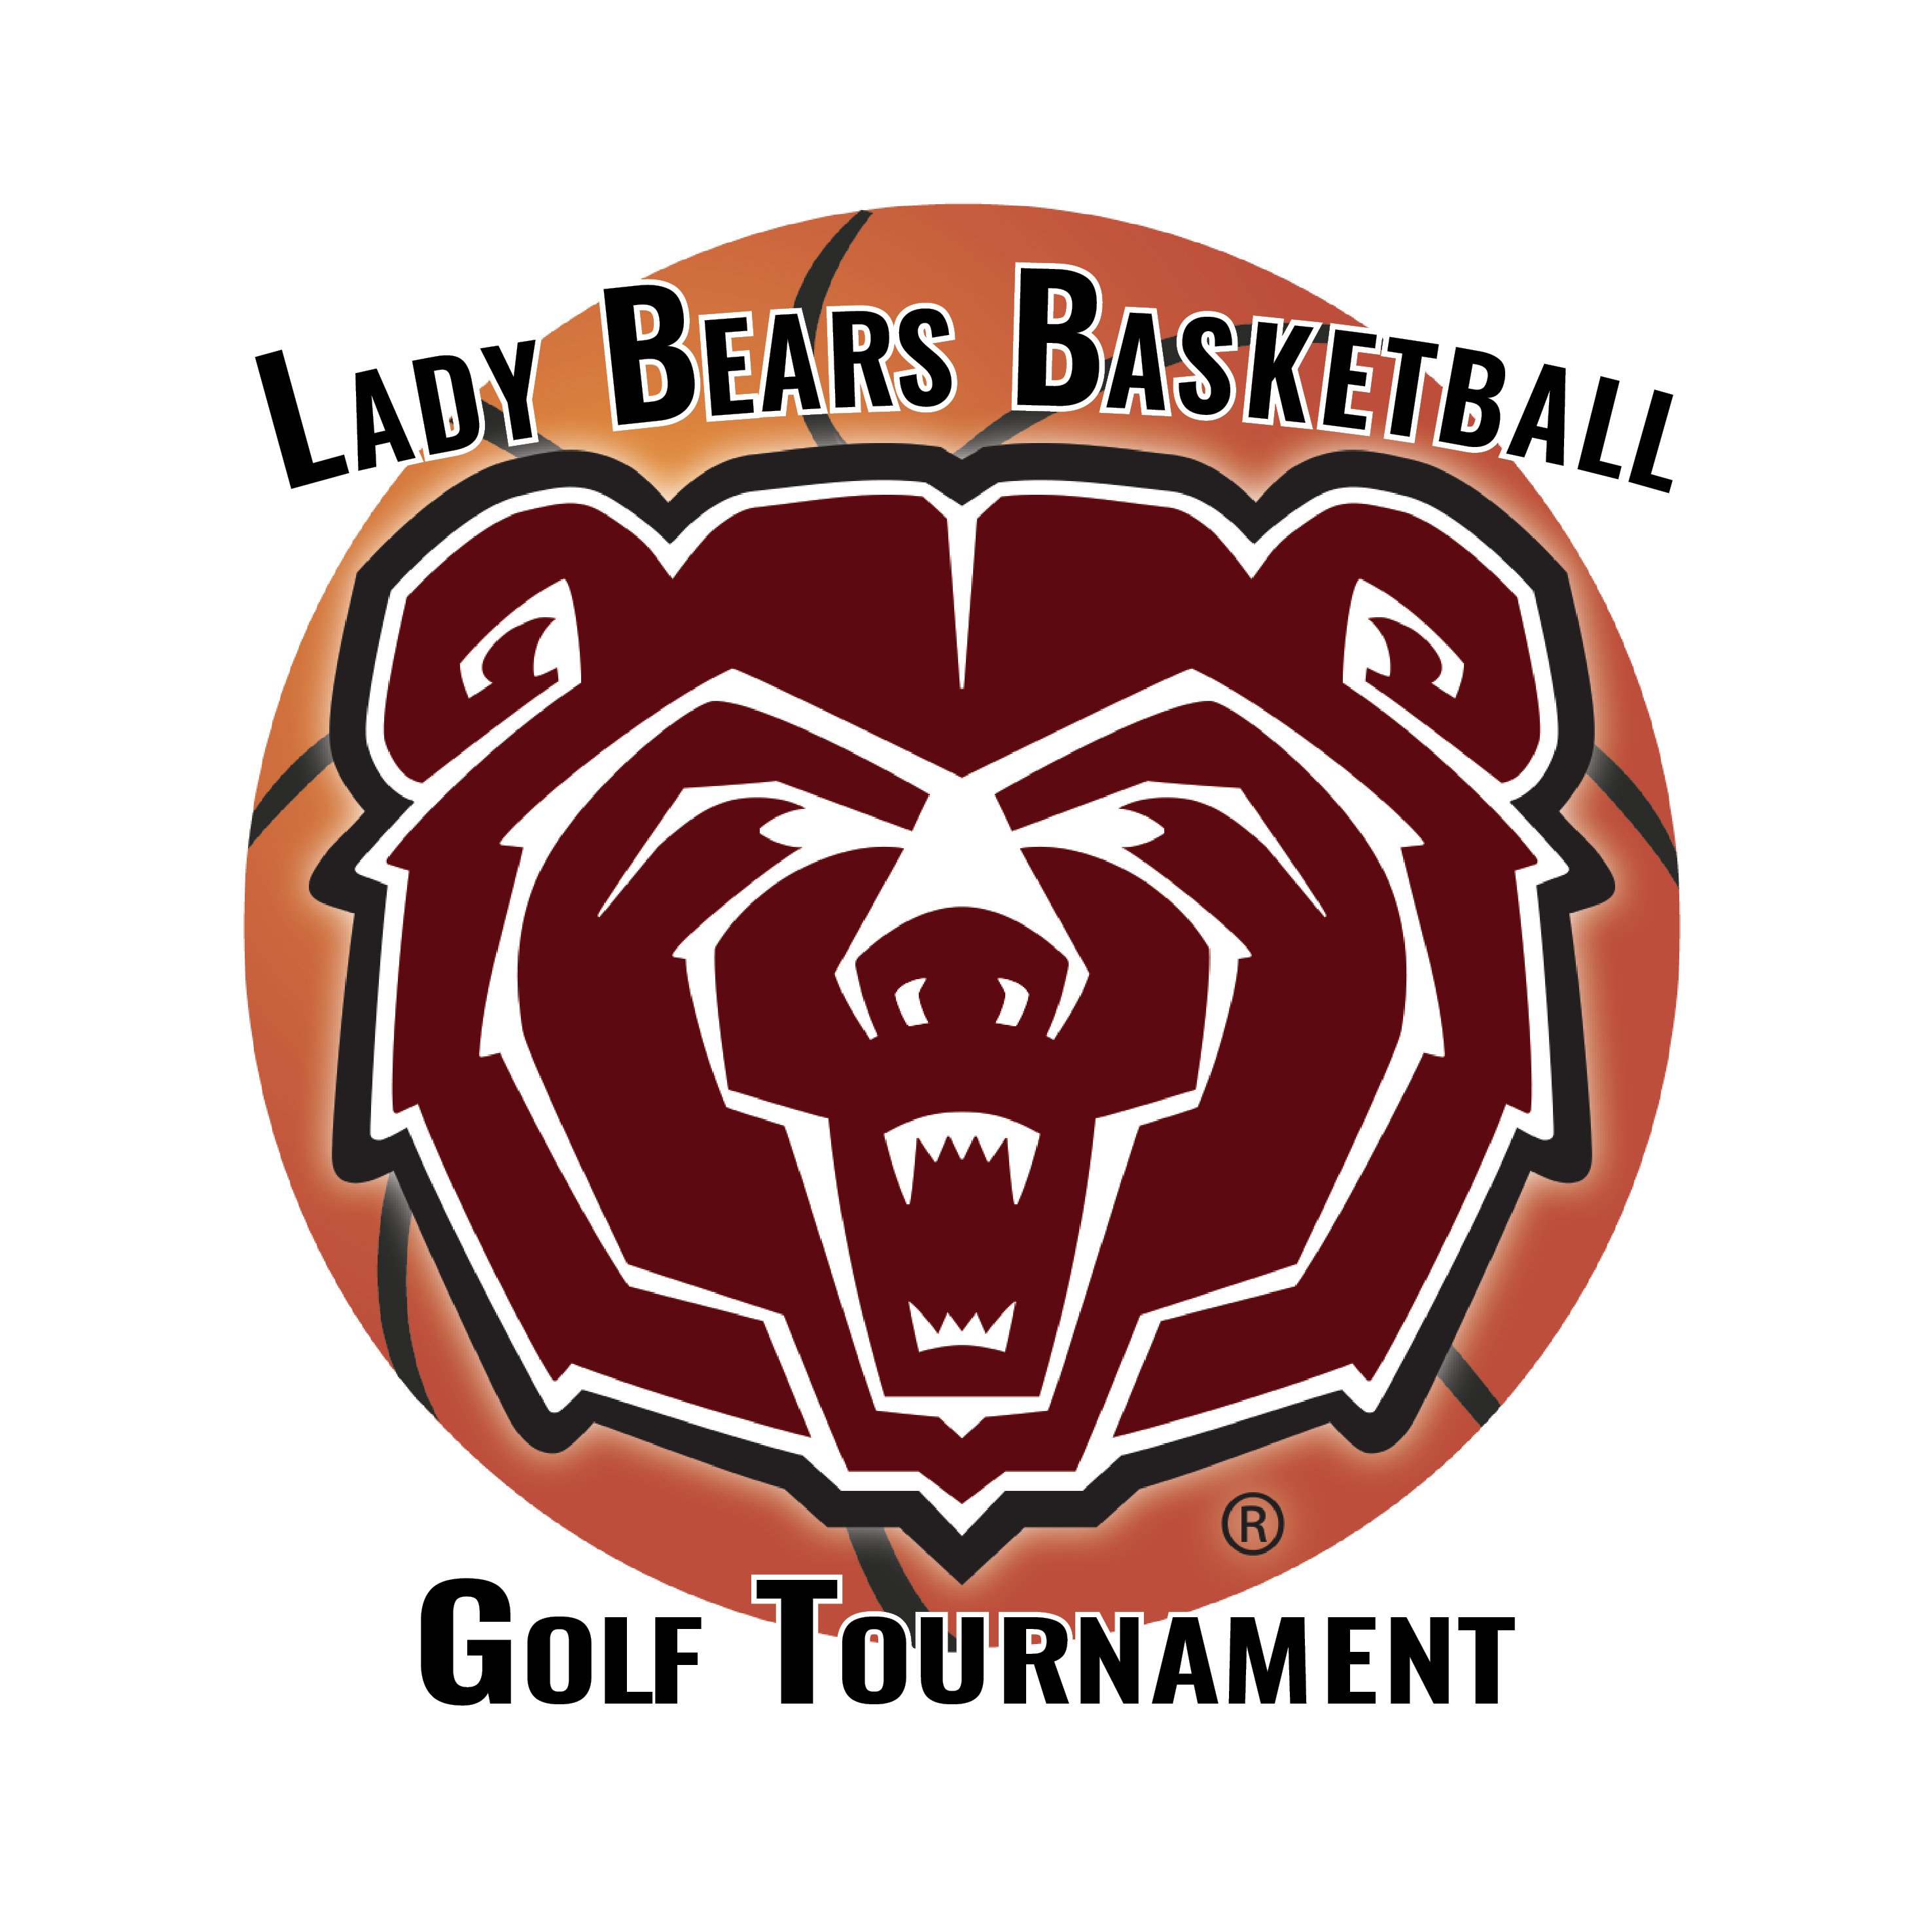 Group of Fans planning the exciting next edition of the once-beloved Lady Bear Basketball Golf Tournament - Saturday 10/1/22 MOSTATEWBBGOLFTOURNEY@gmail.com